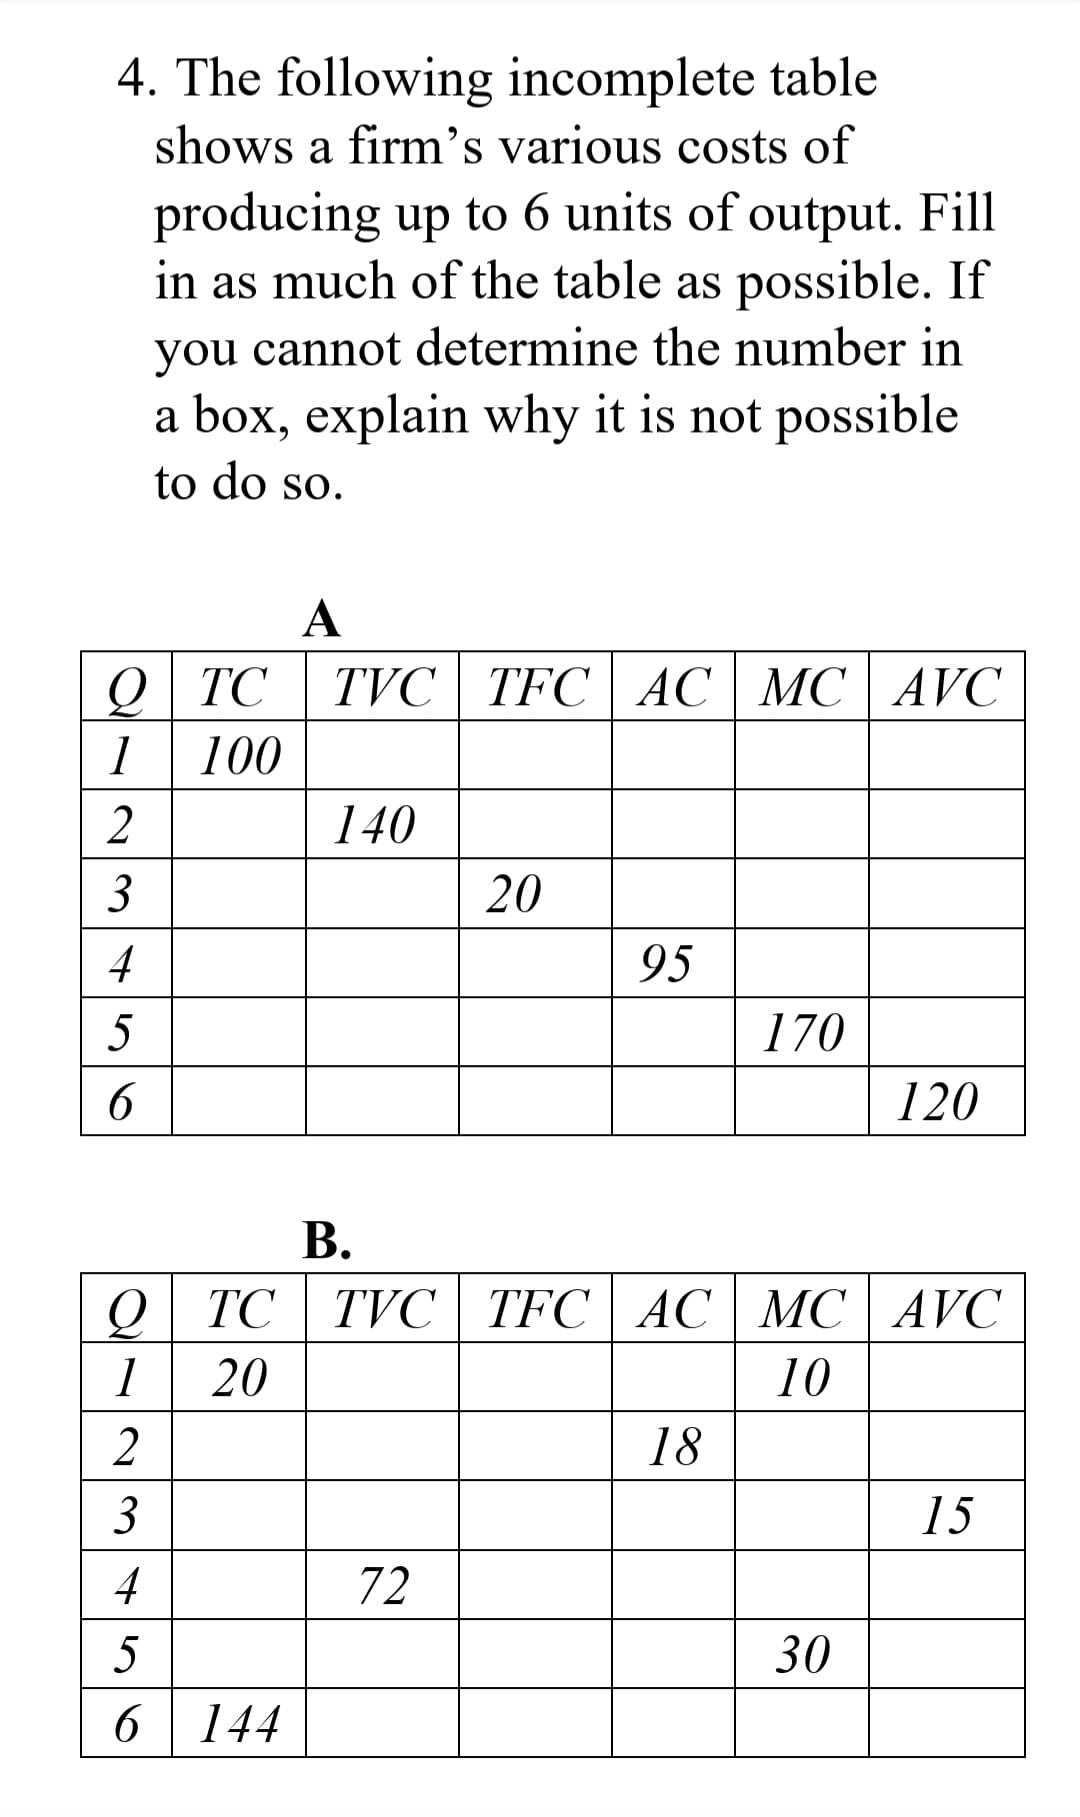 4. The following incomplete table
shows a firm's various costs of
producing up to 6 units of output. Fill
in as much of the table as possible. If
you cannot determine the number in
a box, explain why it is not possible
to do so.
Q TC
1 100
A
TVC TFC AC MC AVC
2345
5
6
140
20
95
170
120
B.
QTC TVC TFC AC MC AVC
1 20
2
3456
6 144
72
18
10
15
30